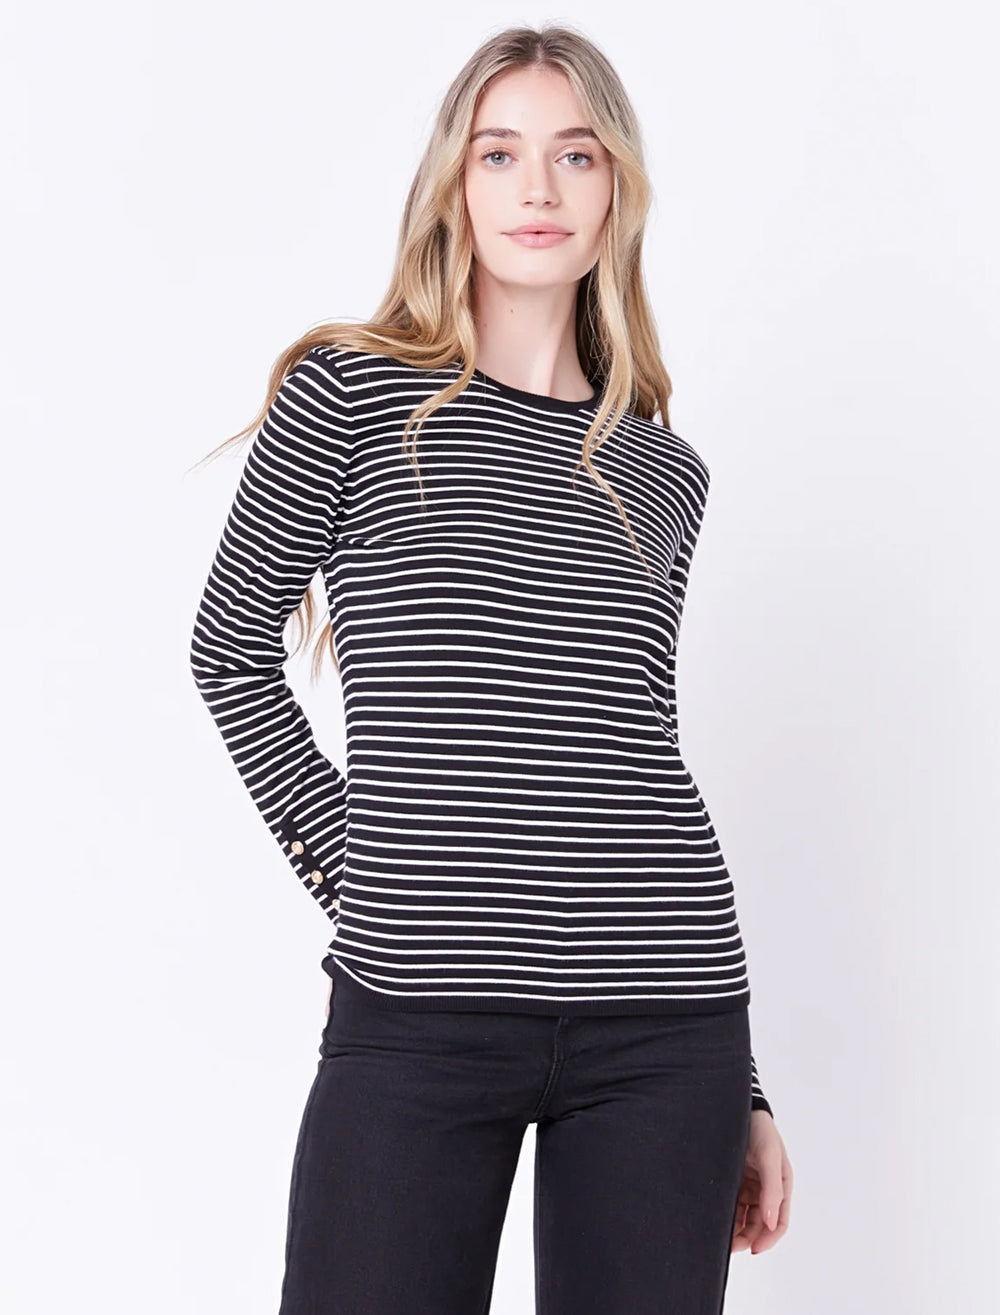 Model wearing English Factory's striped sweater with button detail in black and white.